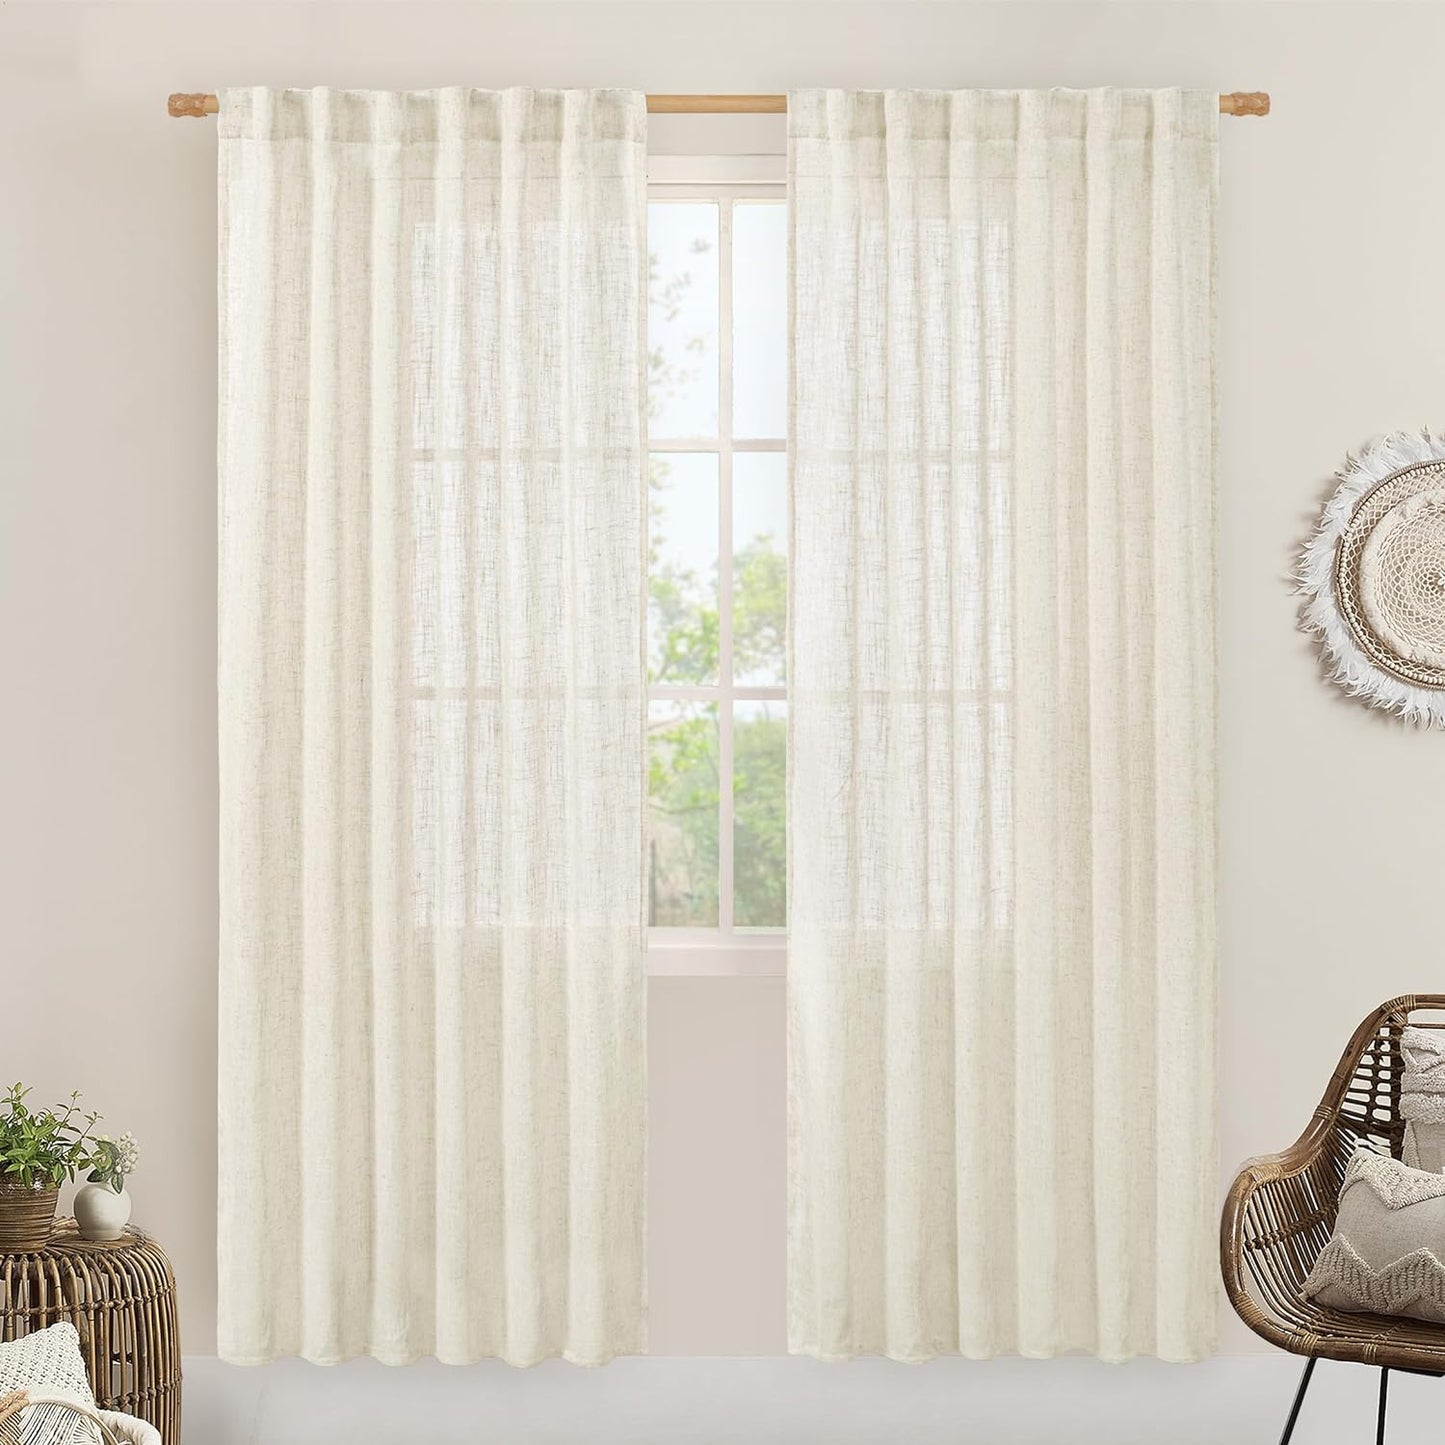 LAMIT Natural Linen Blended Curtains for Living Room, Back Tab and Rod Pocket Semi Sheer Curtains Light Filtering Country Rustic Drapes for Bedroom/Farmhouse, 2 Panels,52 X 108 Inch, Linen  LAMIT Natural 52W X 80L 